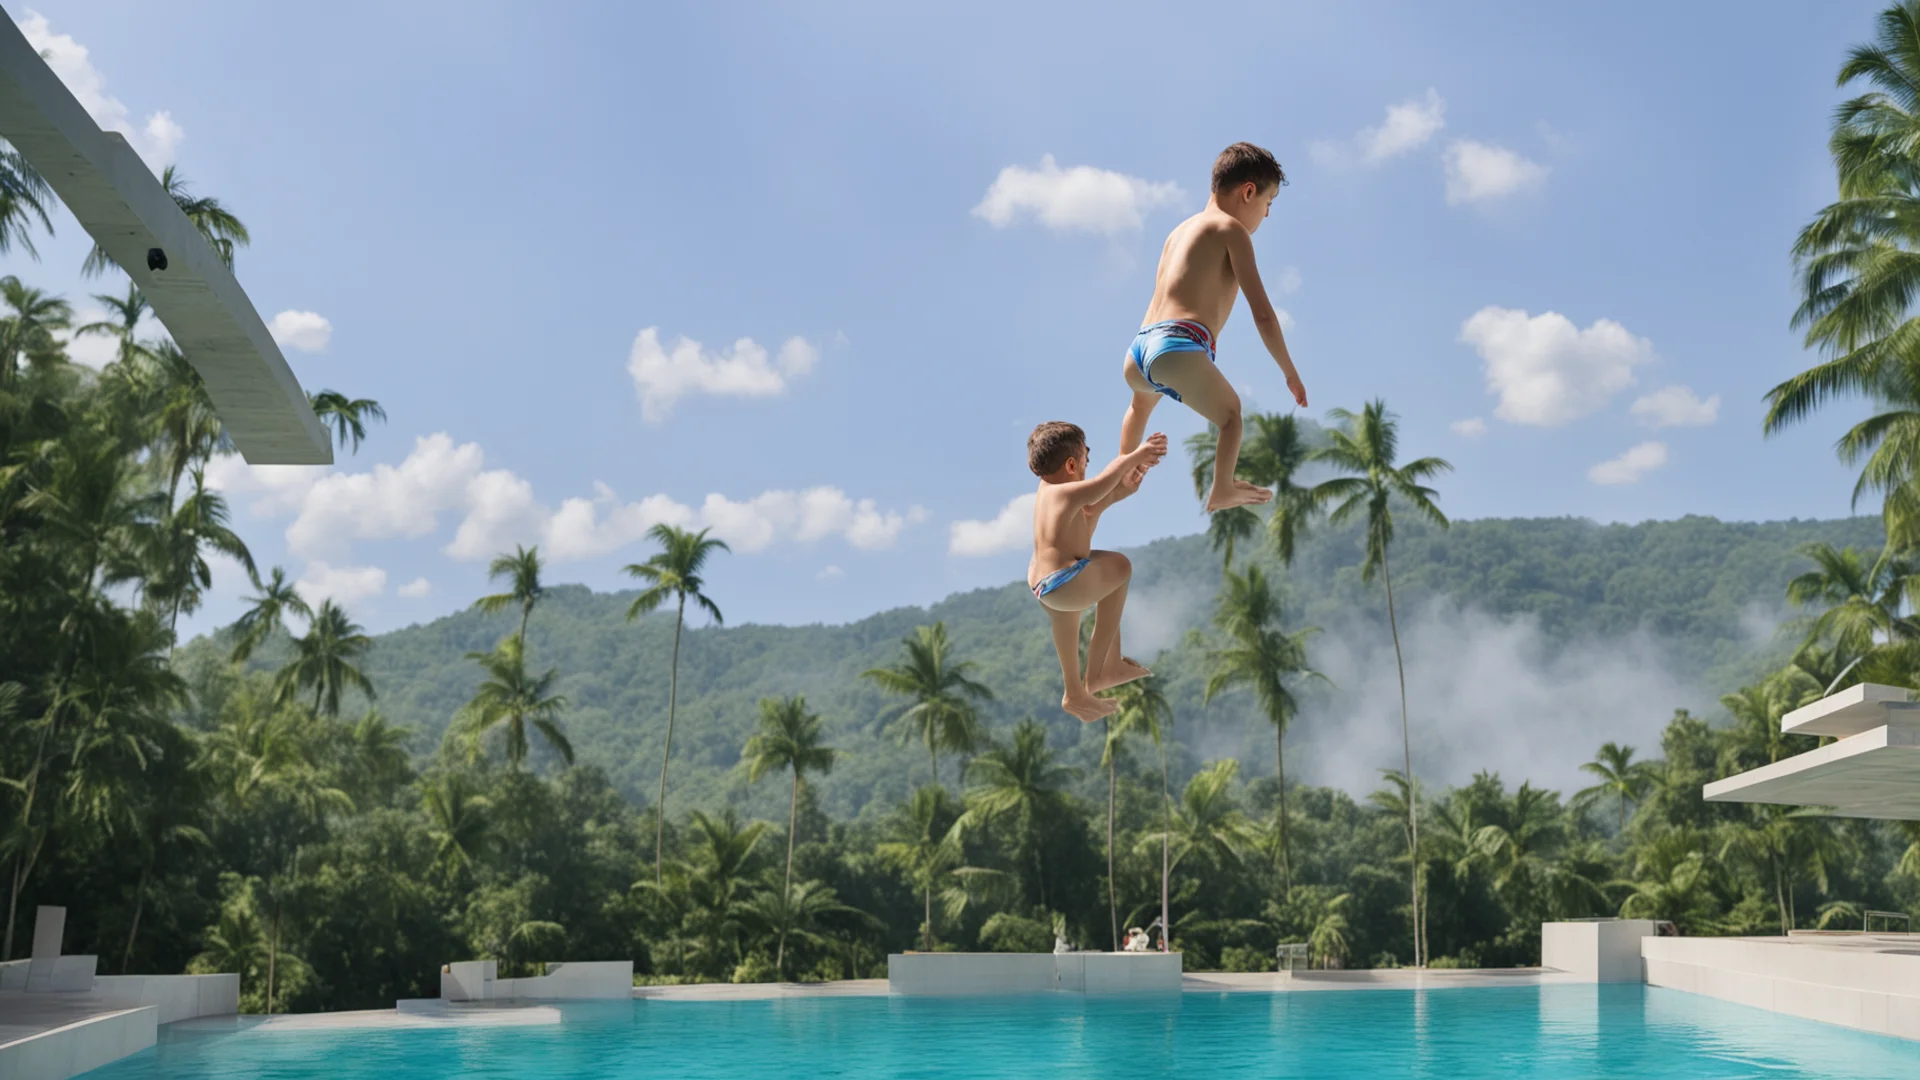 amazing a kid preparing to make a swim jump from really high platform awesome portrait 2 wide